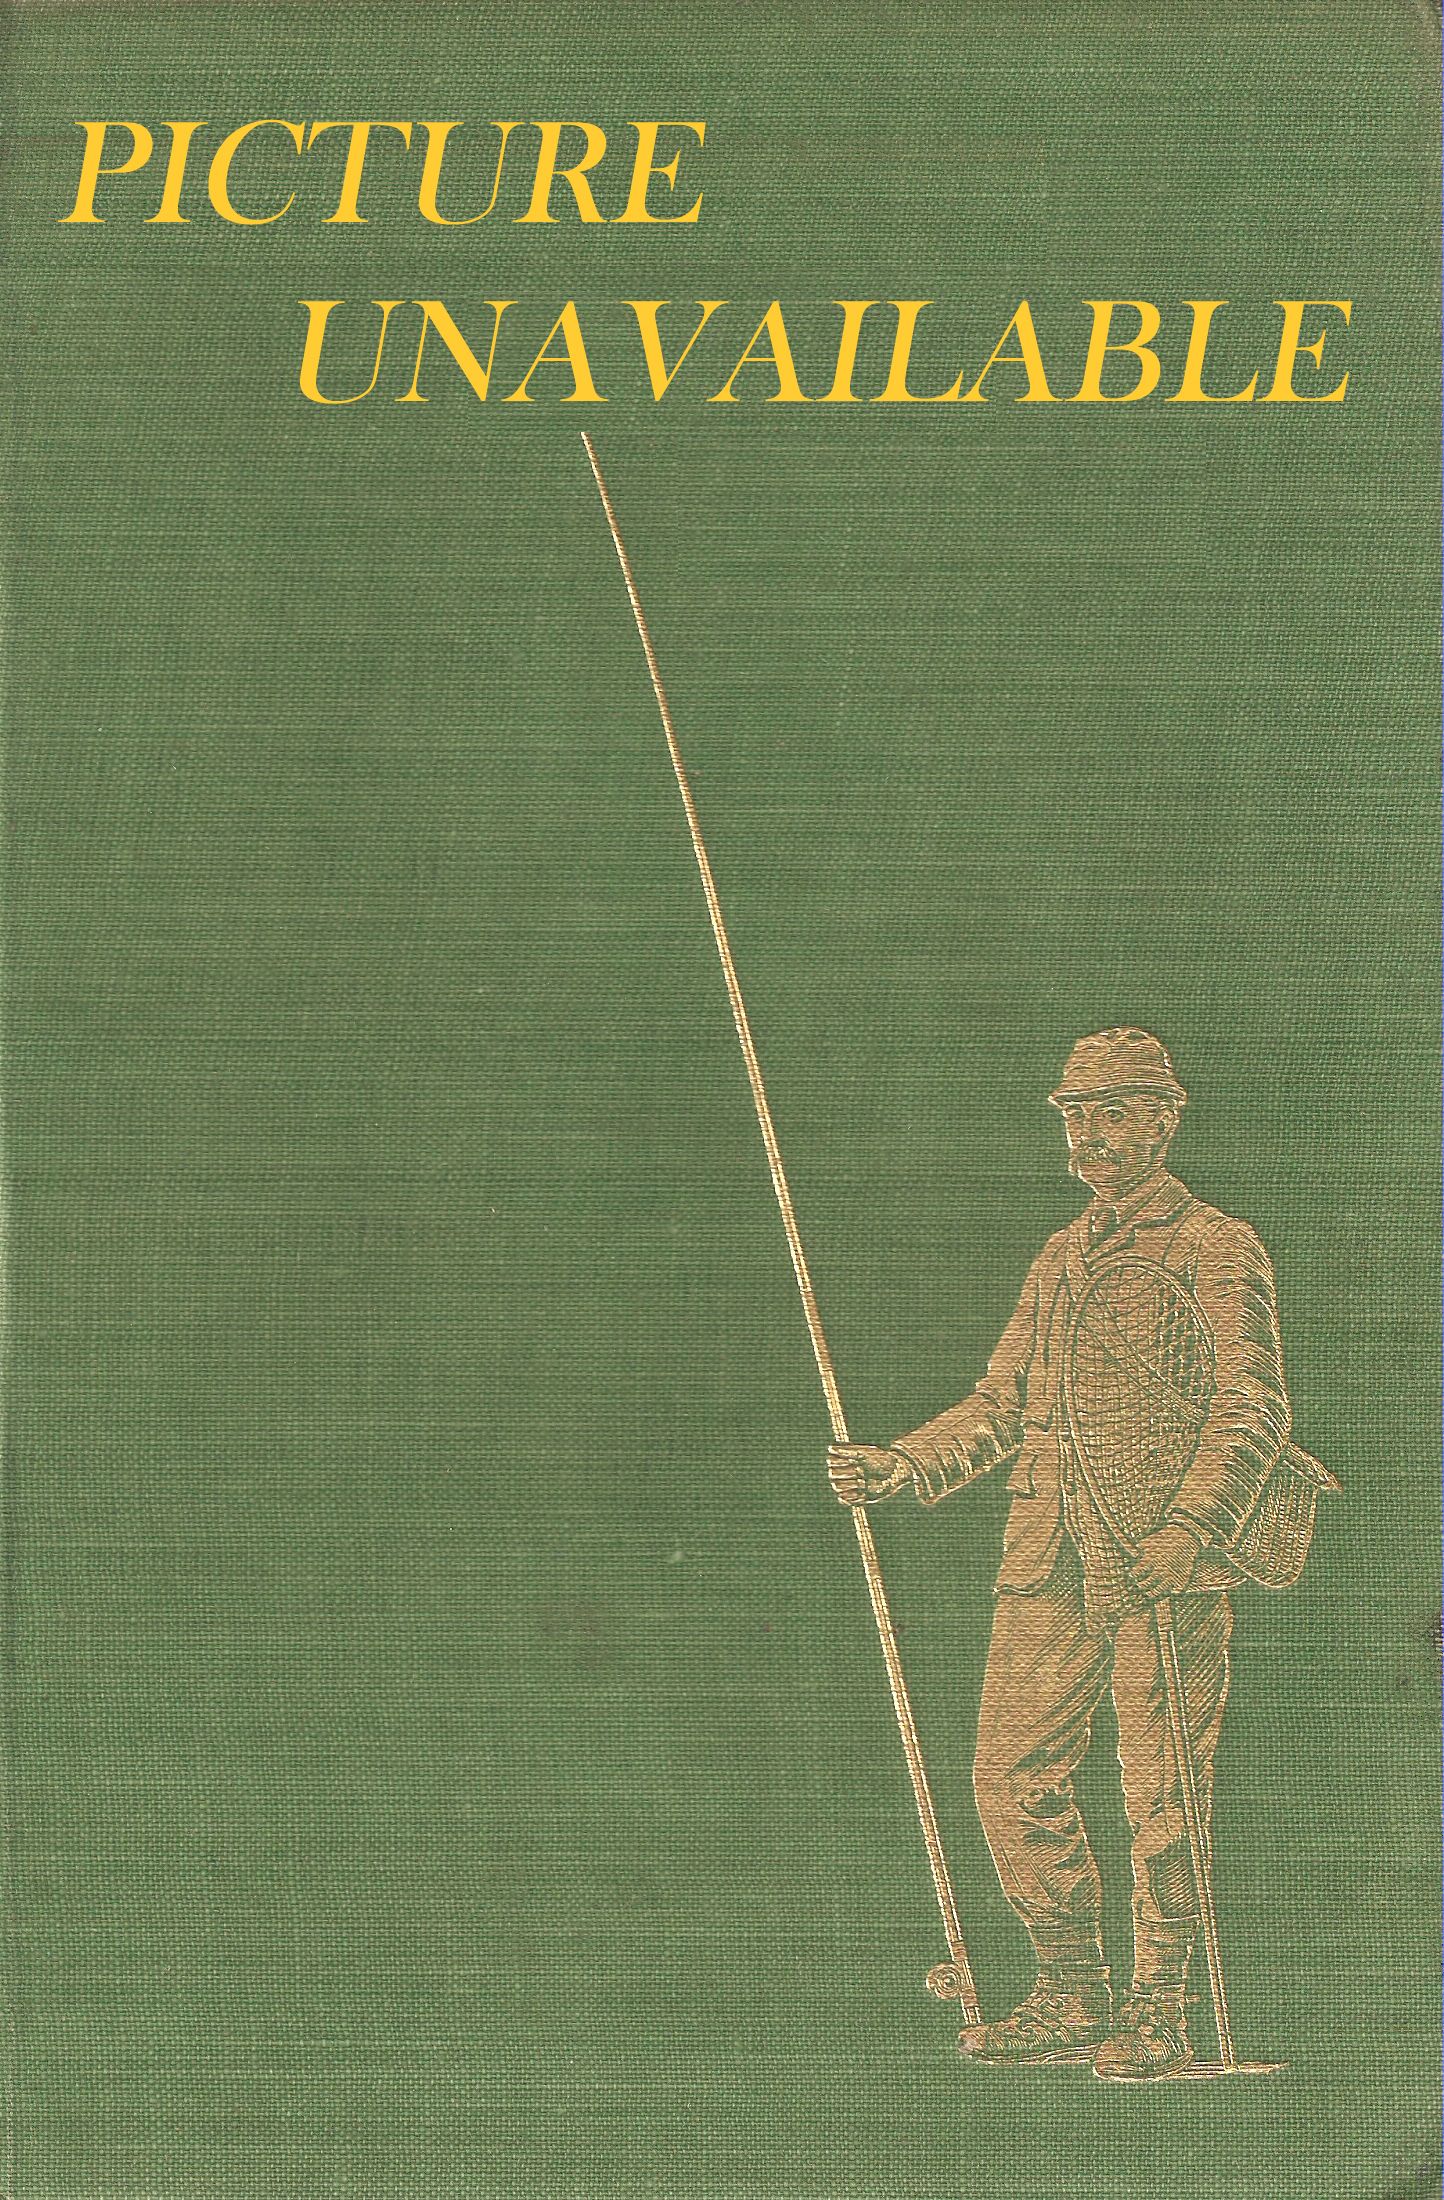 THE NEW COMPLEAT ANGLER. By Stephen Downes. Illustrated by Martin  Knowelden.